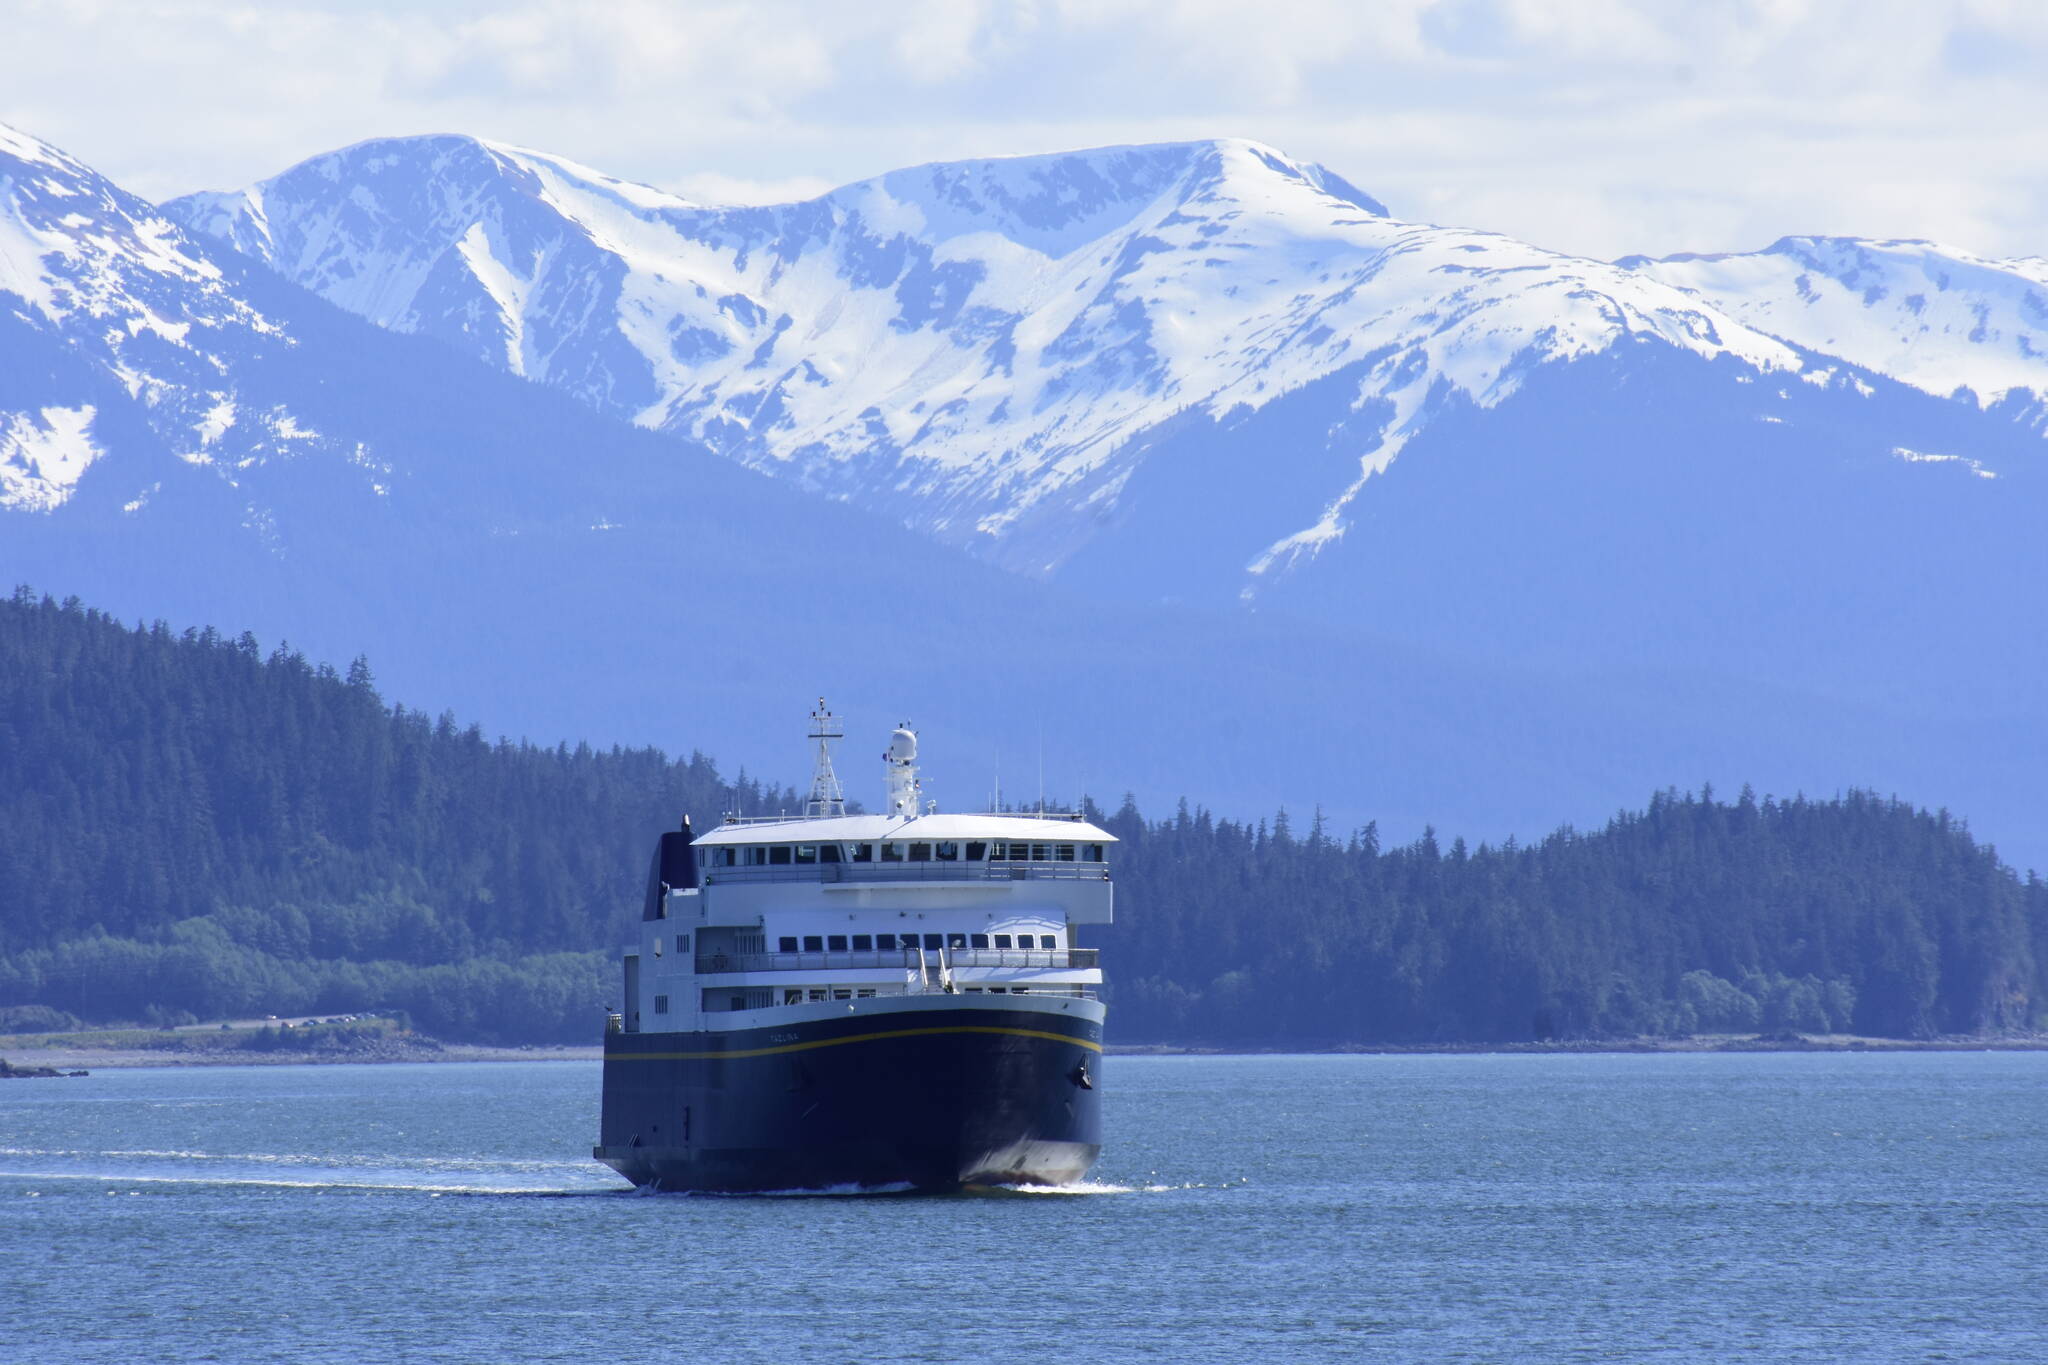 In this Empire file photo, the MV Tazlina heads in to dock in Juneau. The federal Bipartisan Infrastructure Legislation is poised to bring a lot of money to Alaska for things like ferries, but when and how much isn't yet known as many of the programs are new. (Peter Segall / Juneau Empire file)